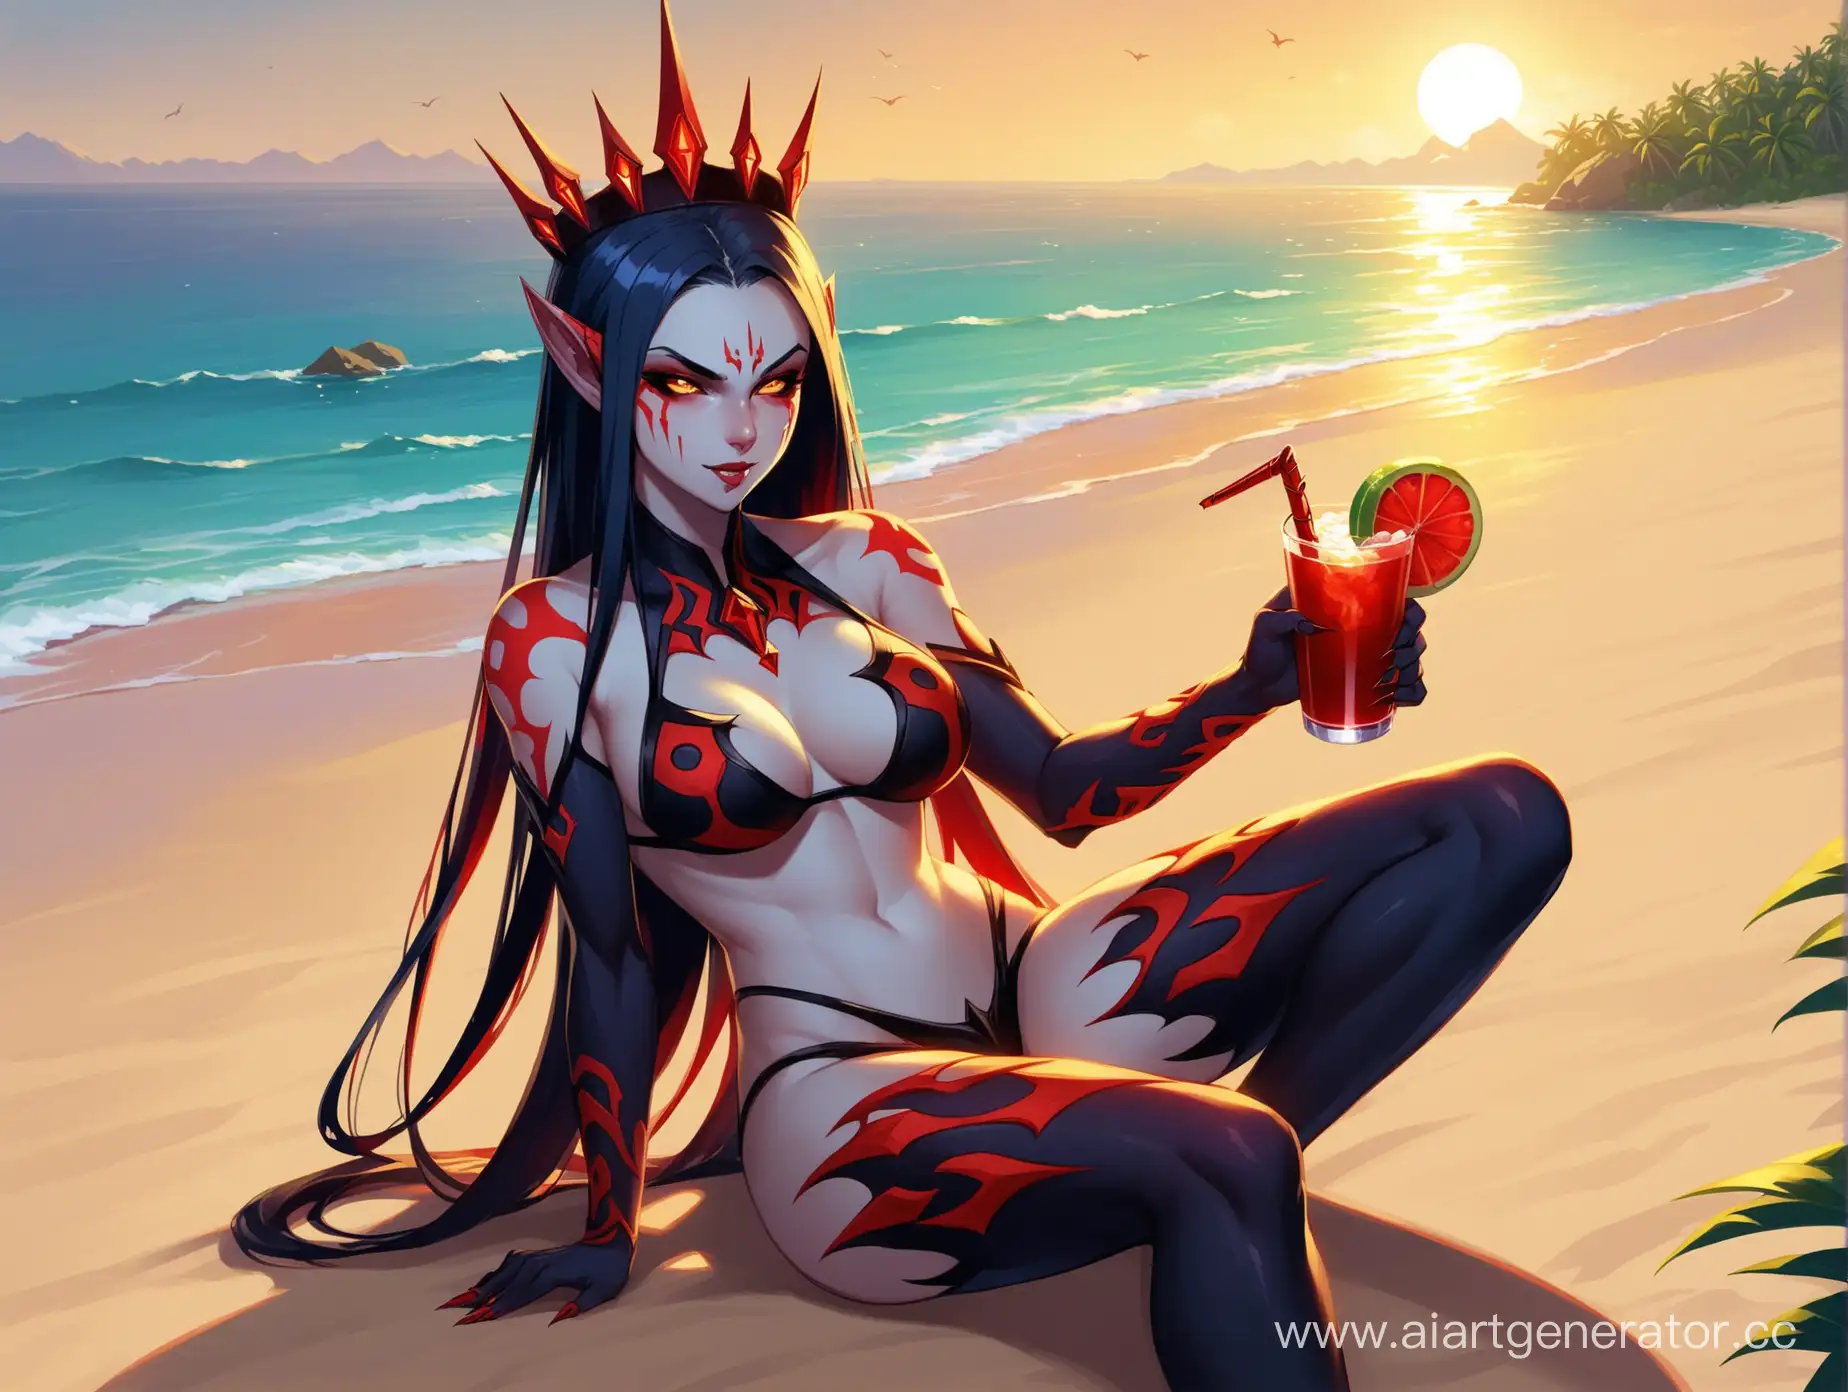 Queen-of-Pain-Dota-2-Beach-Relaxation-with-Drink